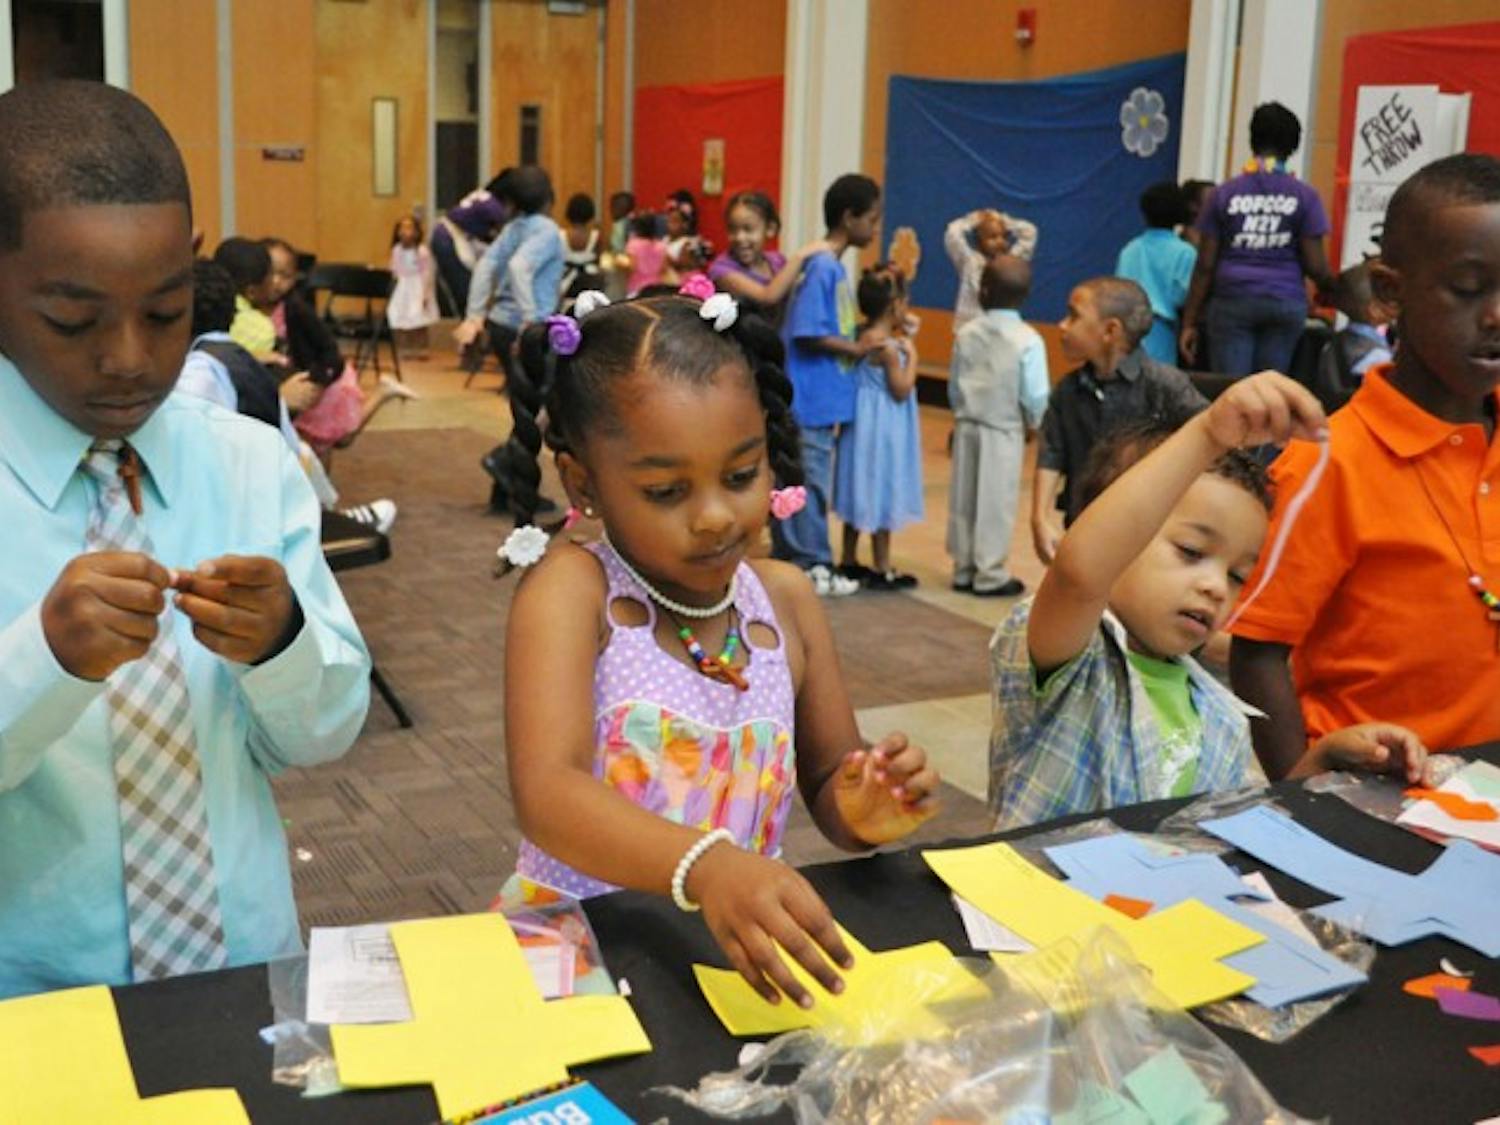 Rashid Latson, 6, Jalaya Husain, 4, Catrel Husain, 3, and Tyrin Williams, 7, make "stained glass" crosses out of foam and tissue paper at one of the activity tables for the Spirit of Faith Christian Center's children’s Easter service at the Phillips Center for the Performing Arts on Sunday.